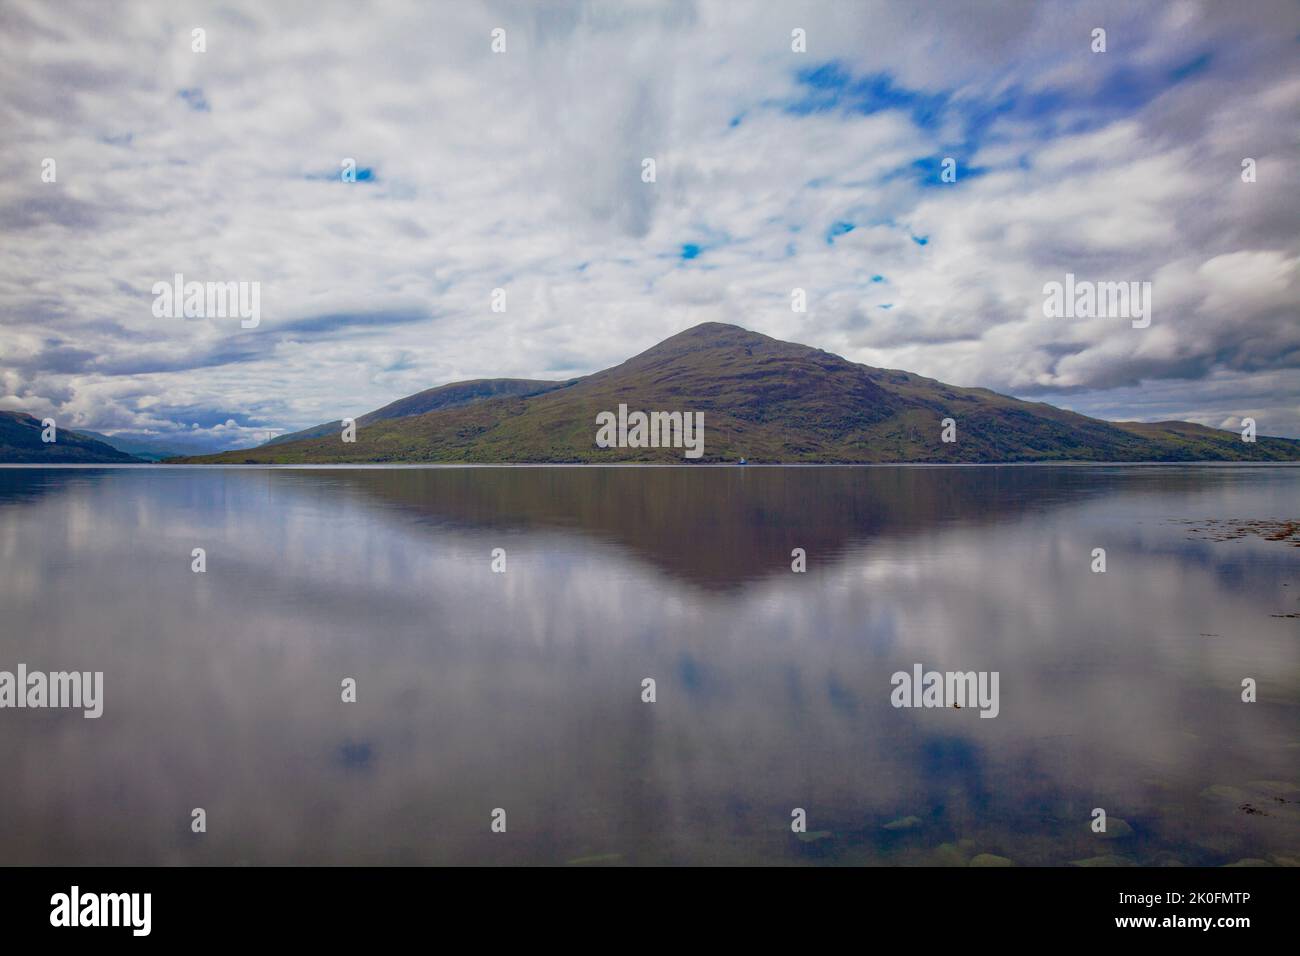 Embracing the natural reflections of Loch Alsh, Scottish Highlands Stock Photo